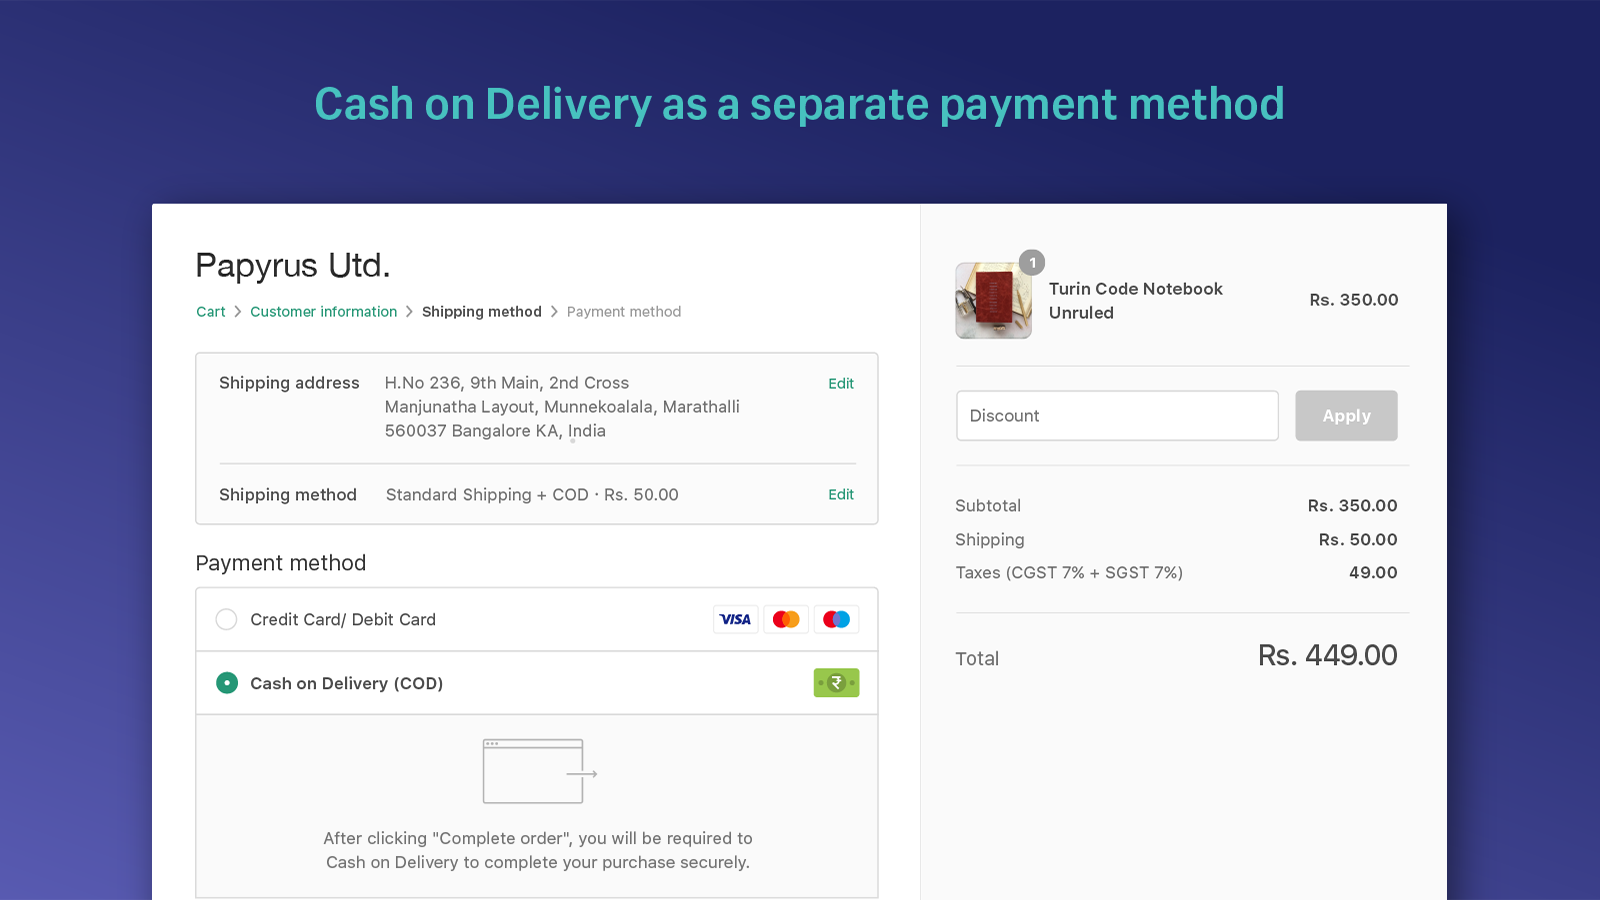 Cash on Delivery as a separate payment method